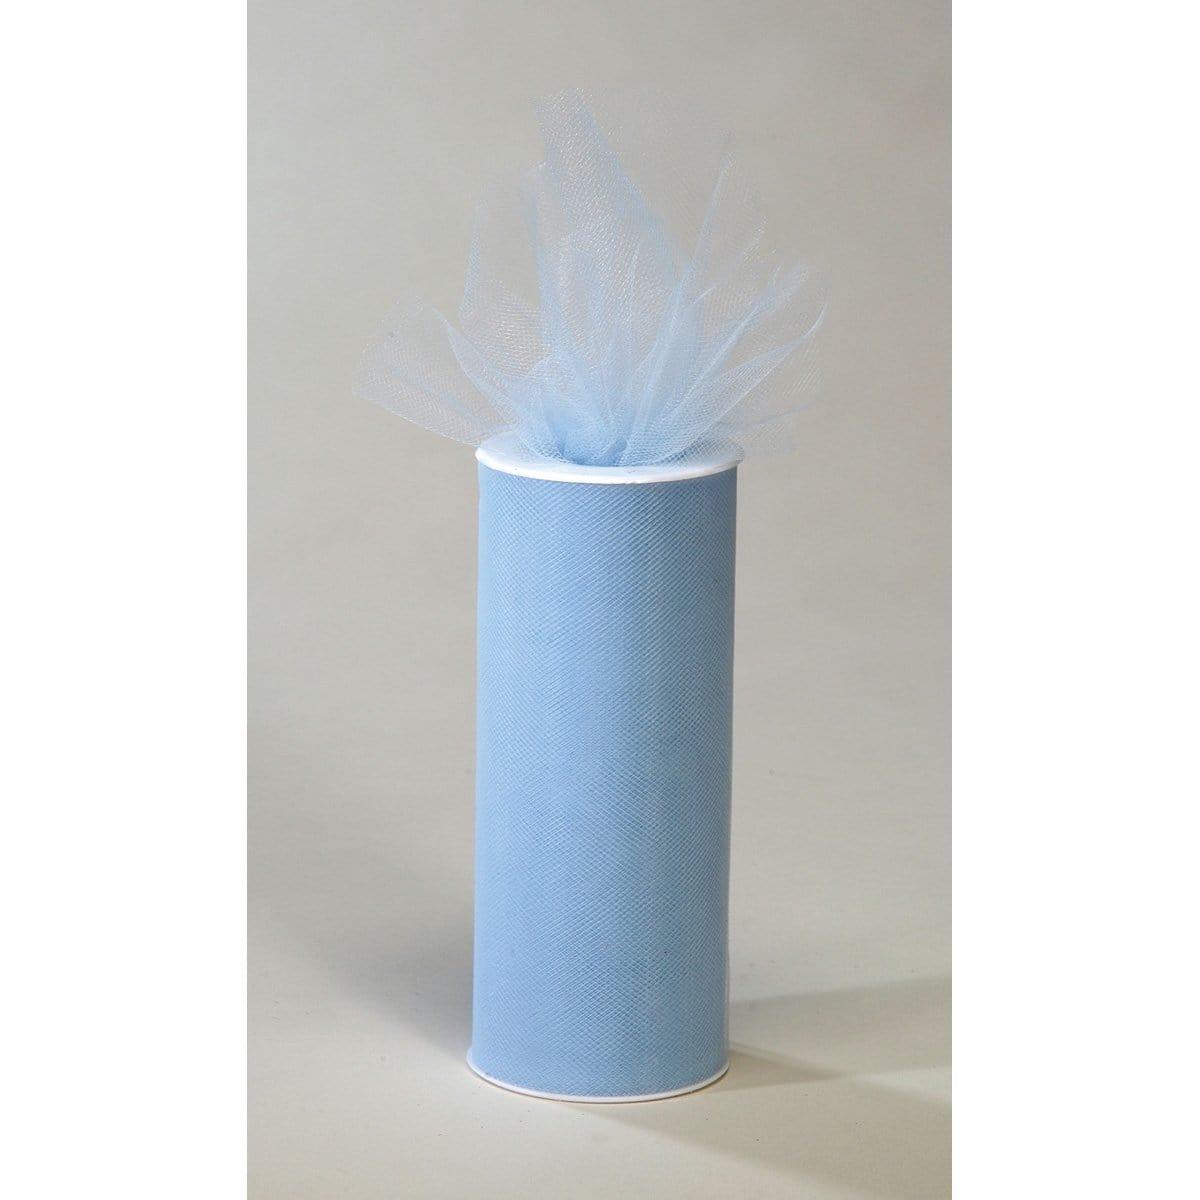 Buy Decorations Tulle Roll - Blue 6.5 in. x 25 yds sold at Party Expert